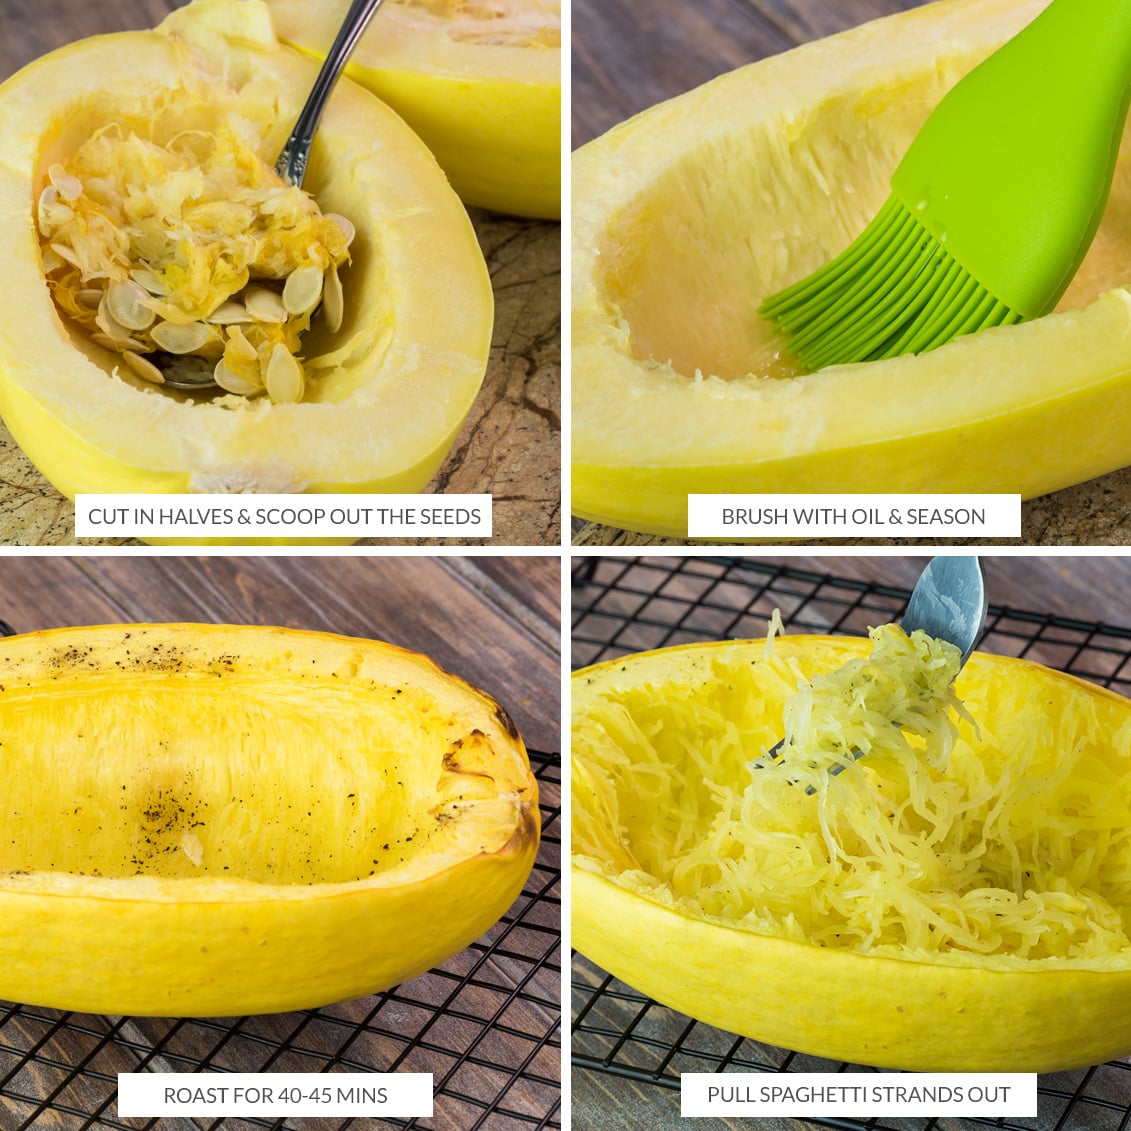 How to bake spaghetti squash for noodles